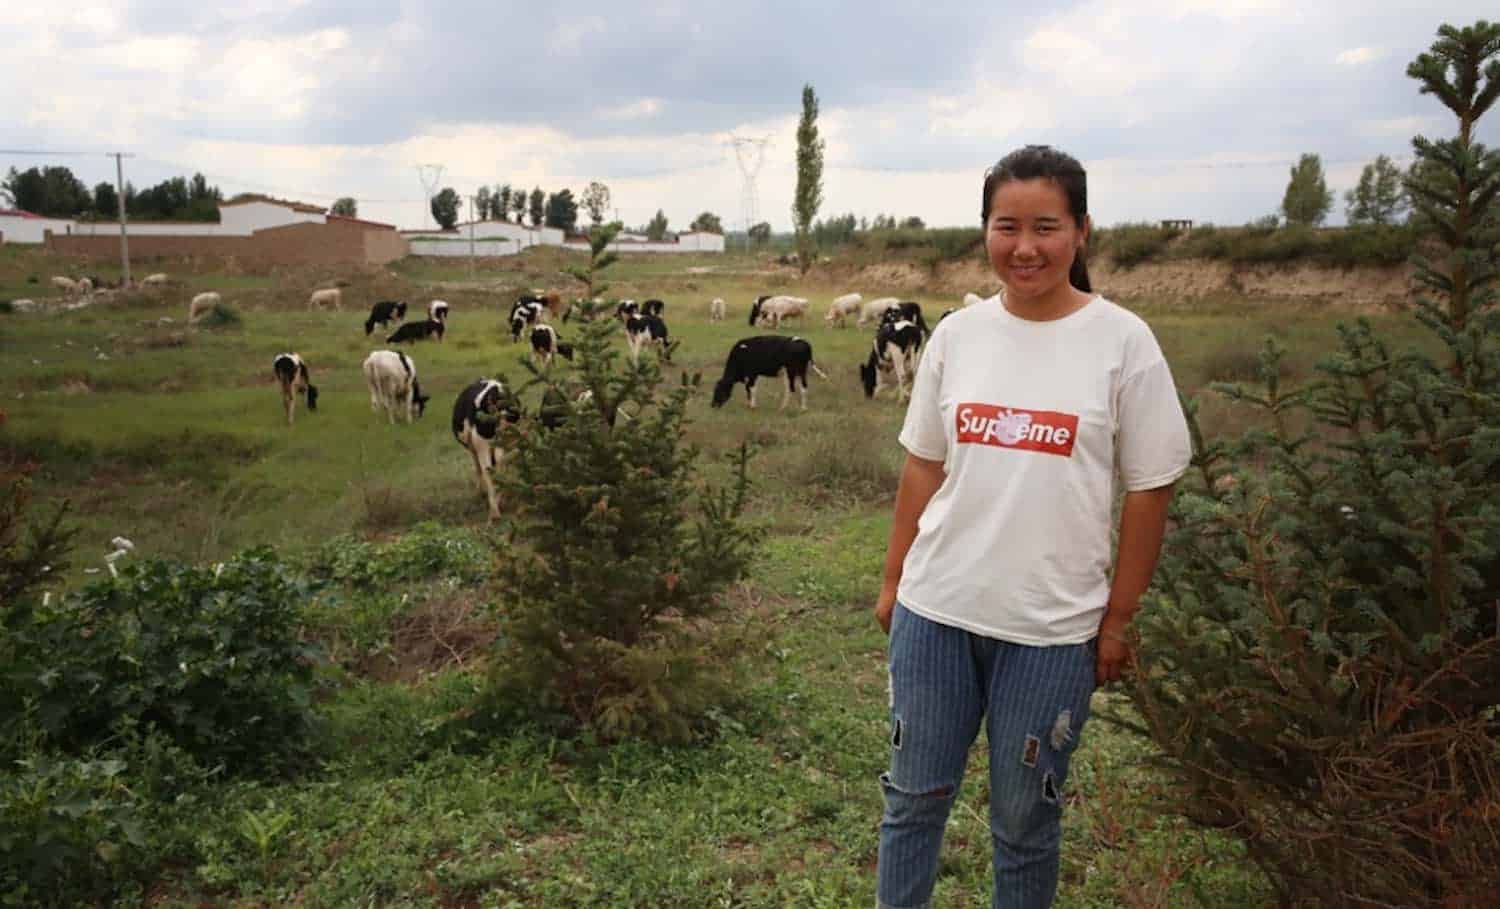 In Inner Mongolia, farmers are re-harnessing alfalfa for feed, seed, and better livelihoods.